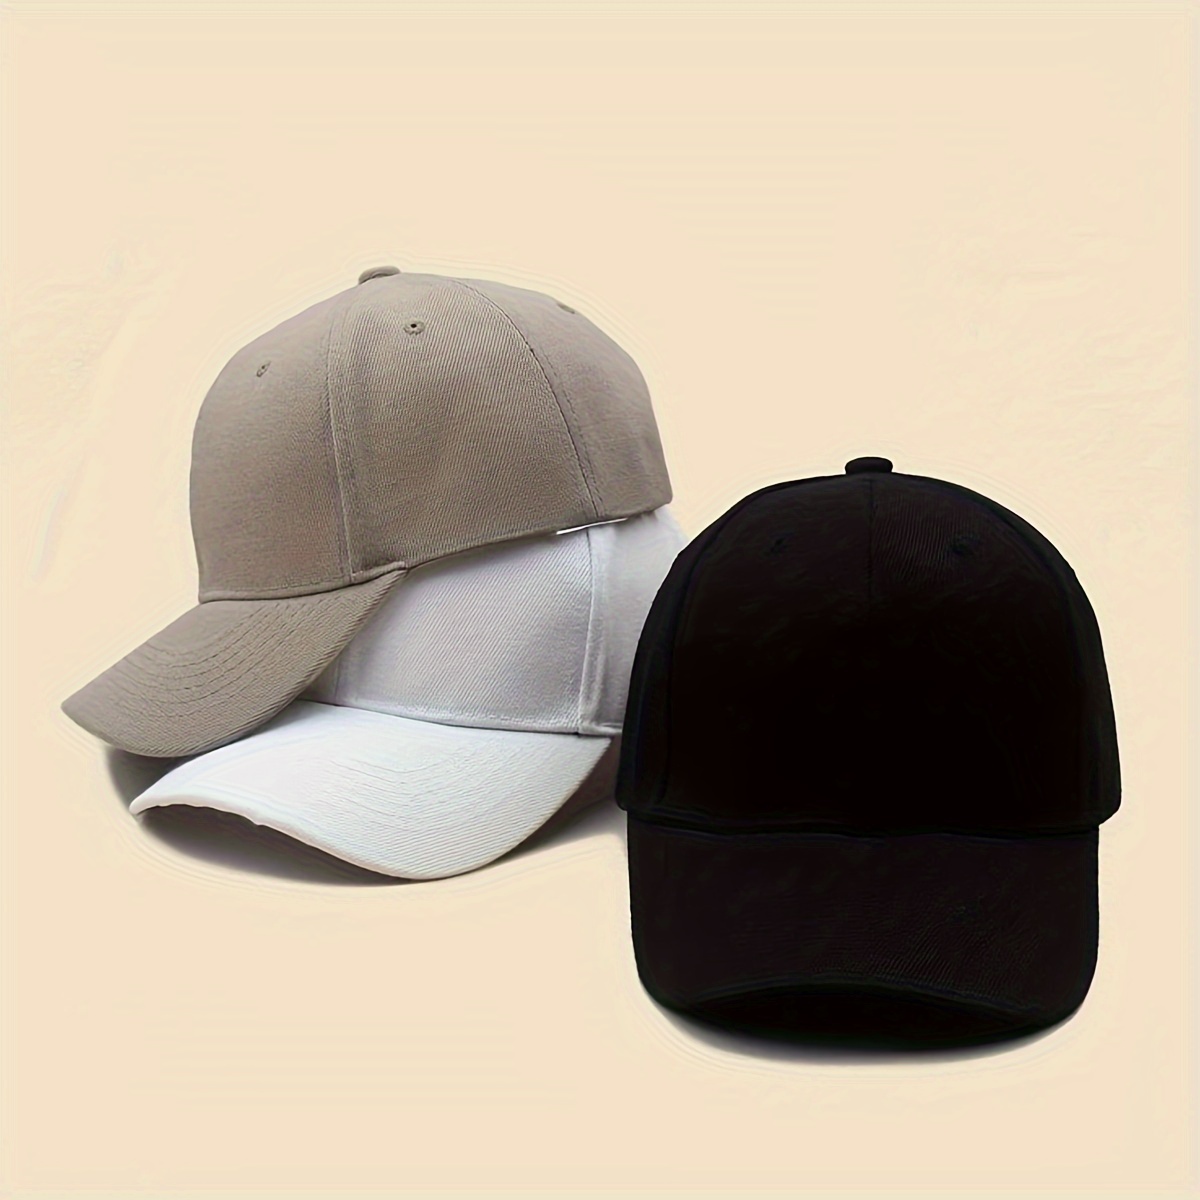 

3pcs Six-sided Polyester Baseball Cap For Men And Women, Adult Flat Face Hat For Sports And Outdoor Leisure